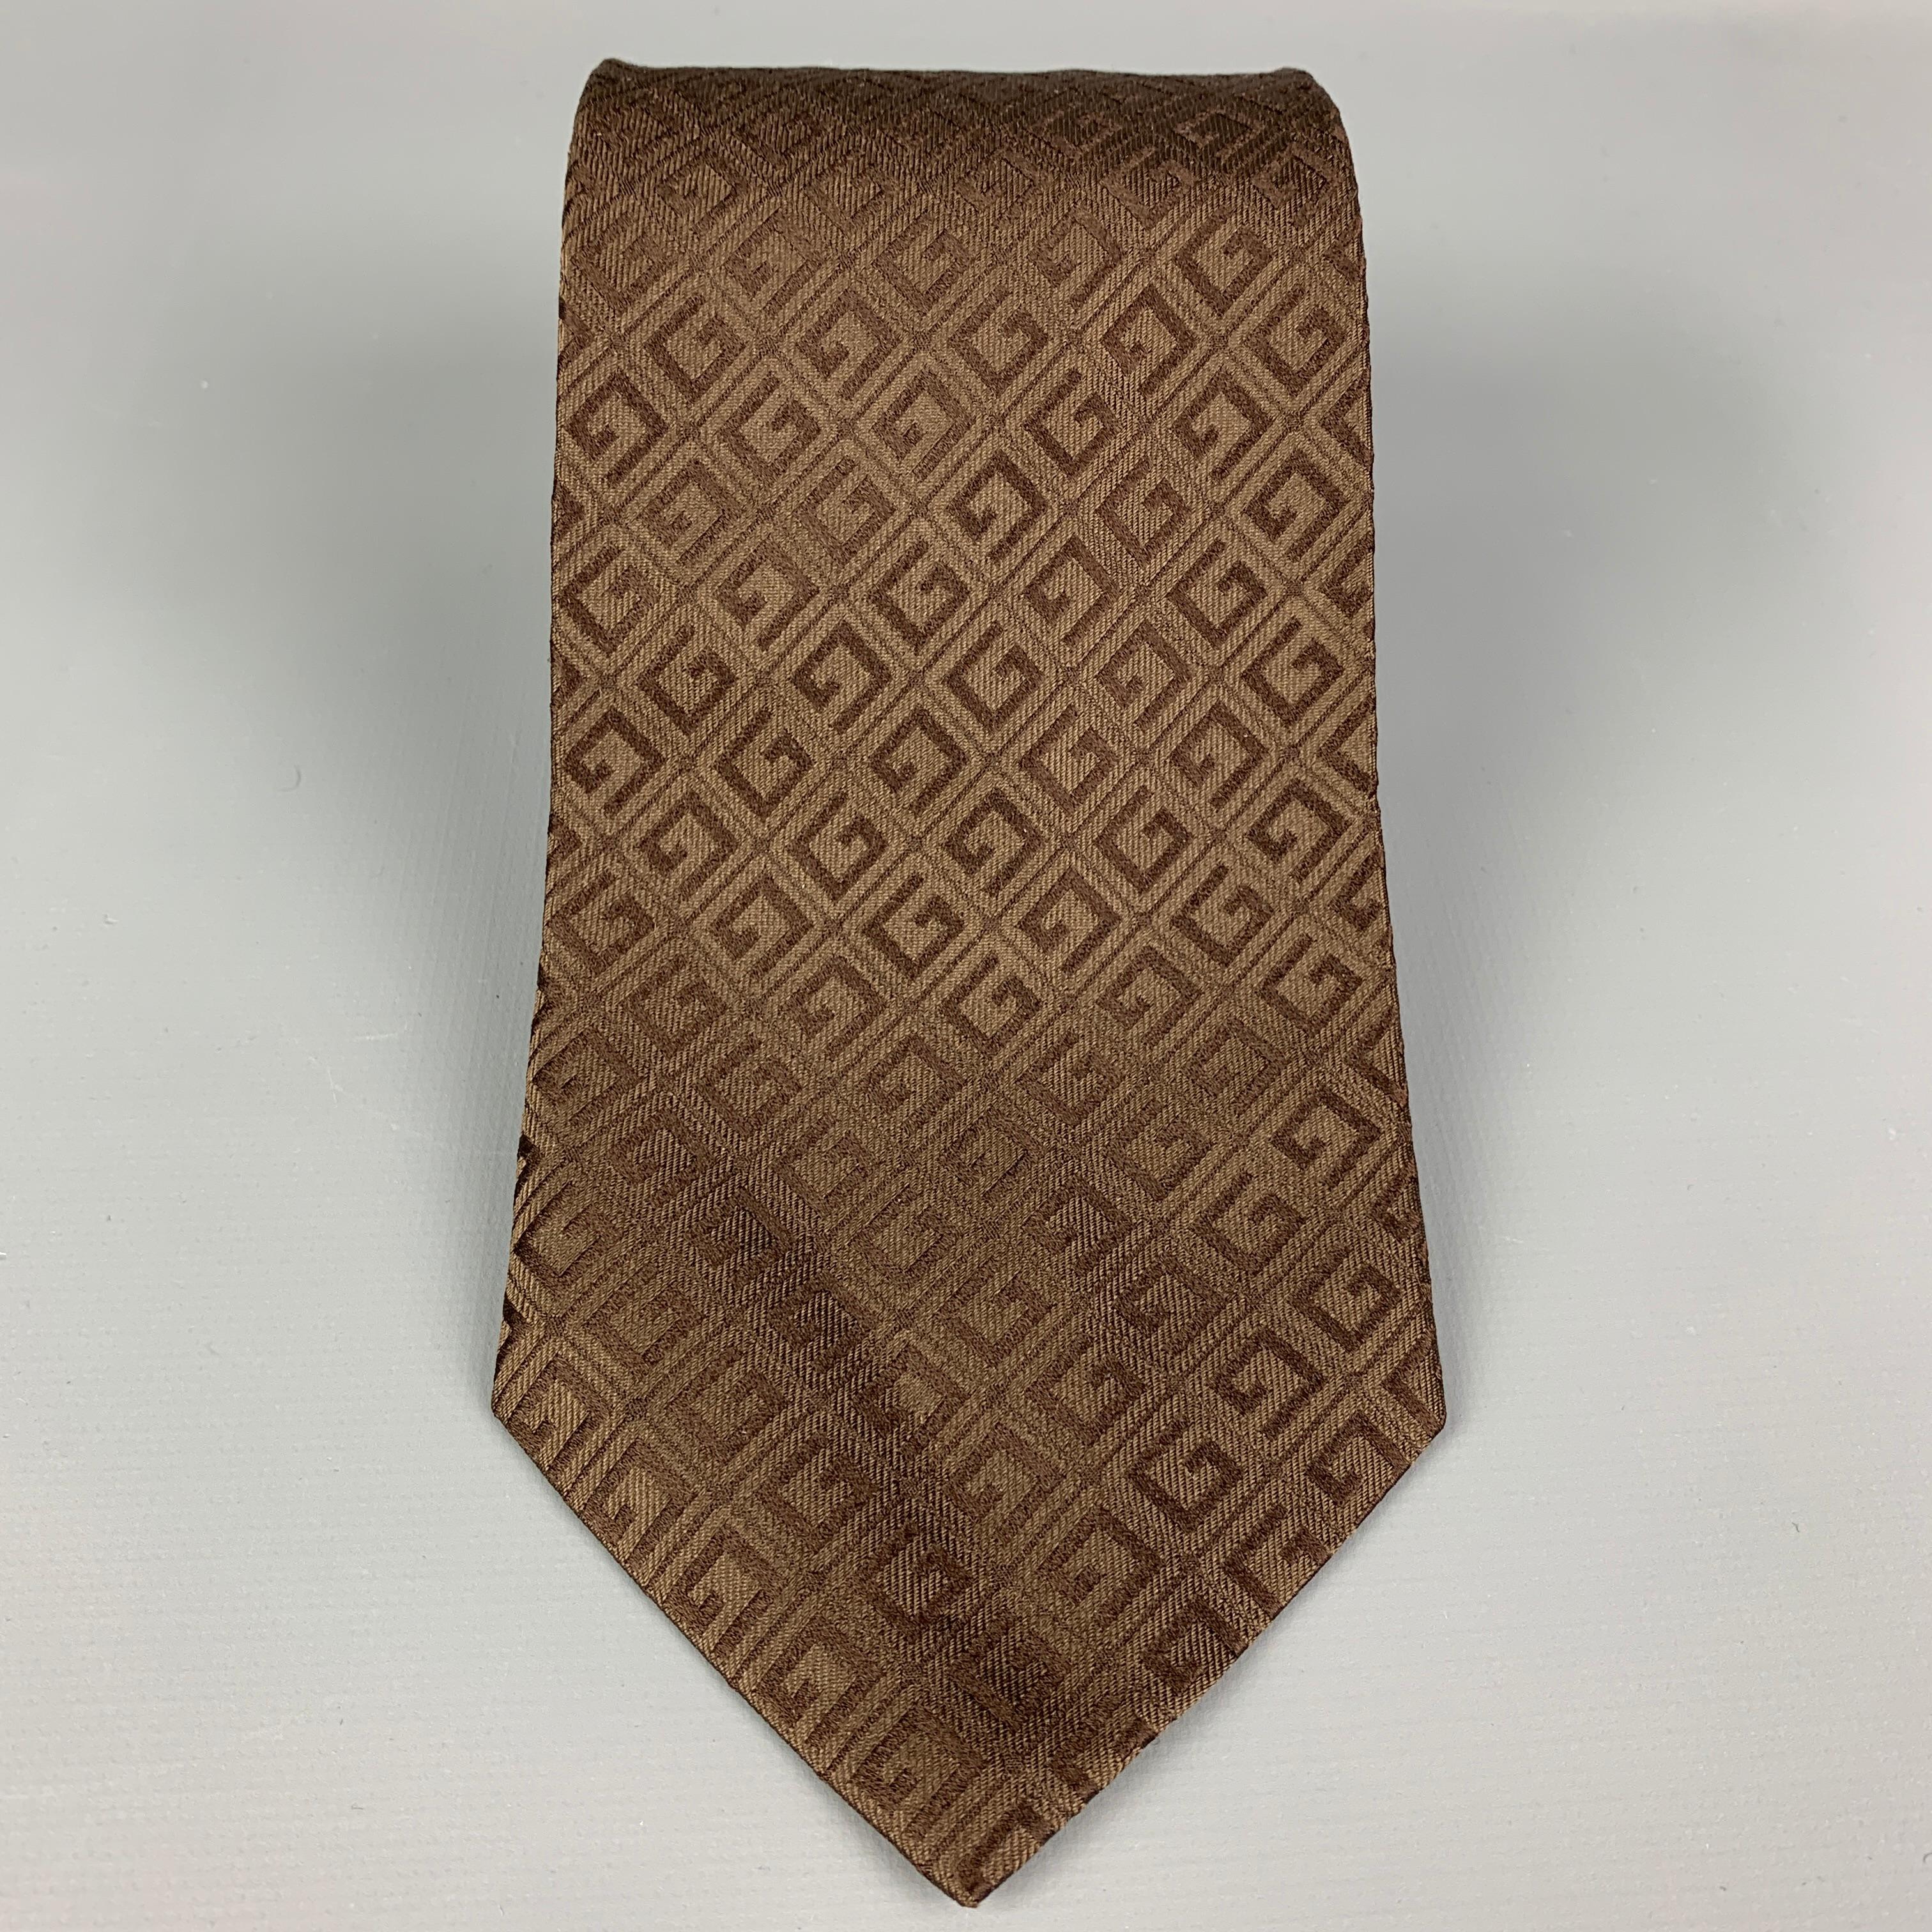 GUCCI necktie comes in a brown textured jacquard silk. Made in Italy. 

Very Good Pre-Owned Condition.

Measurements:

Width: 3.5 in. 